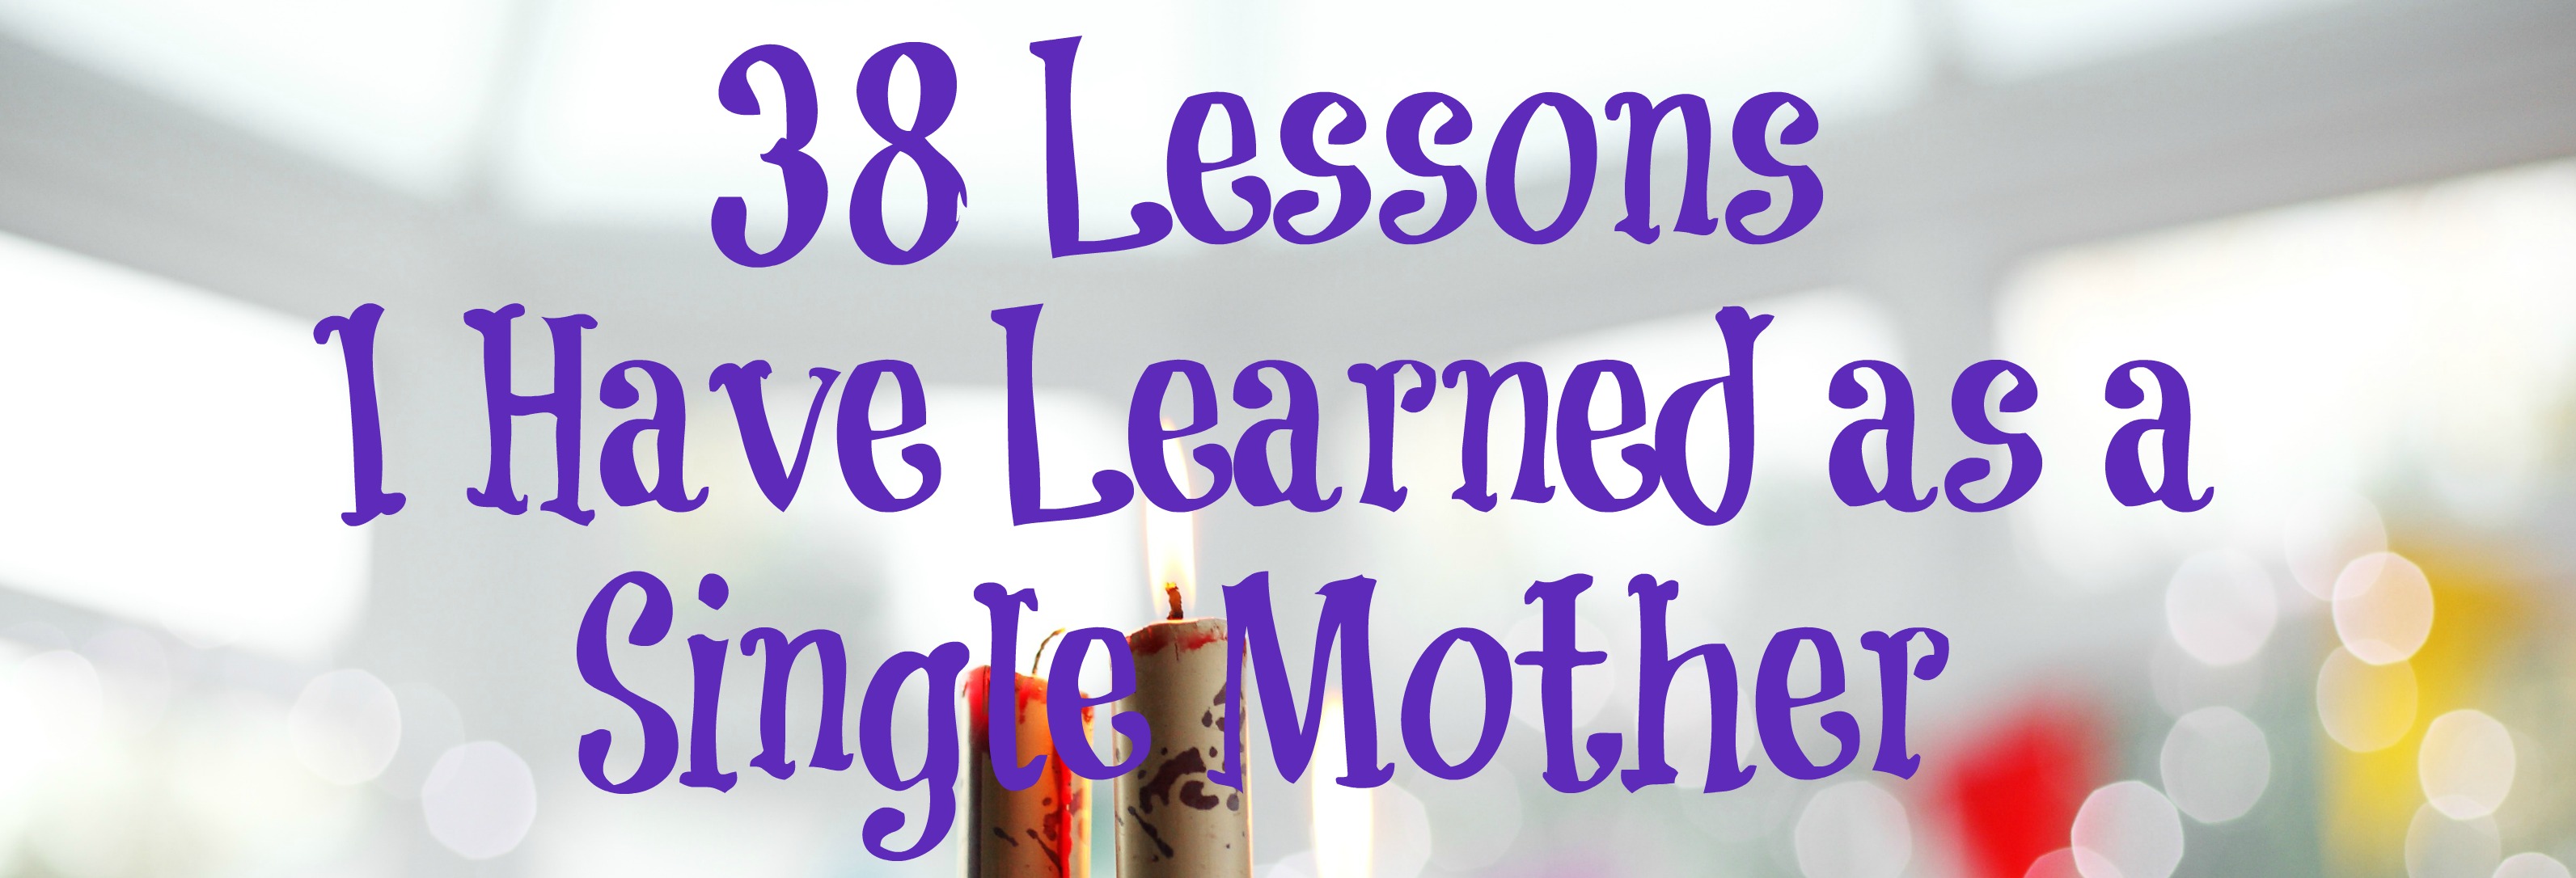 38 Lessons I Have Learned as a Single Mother